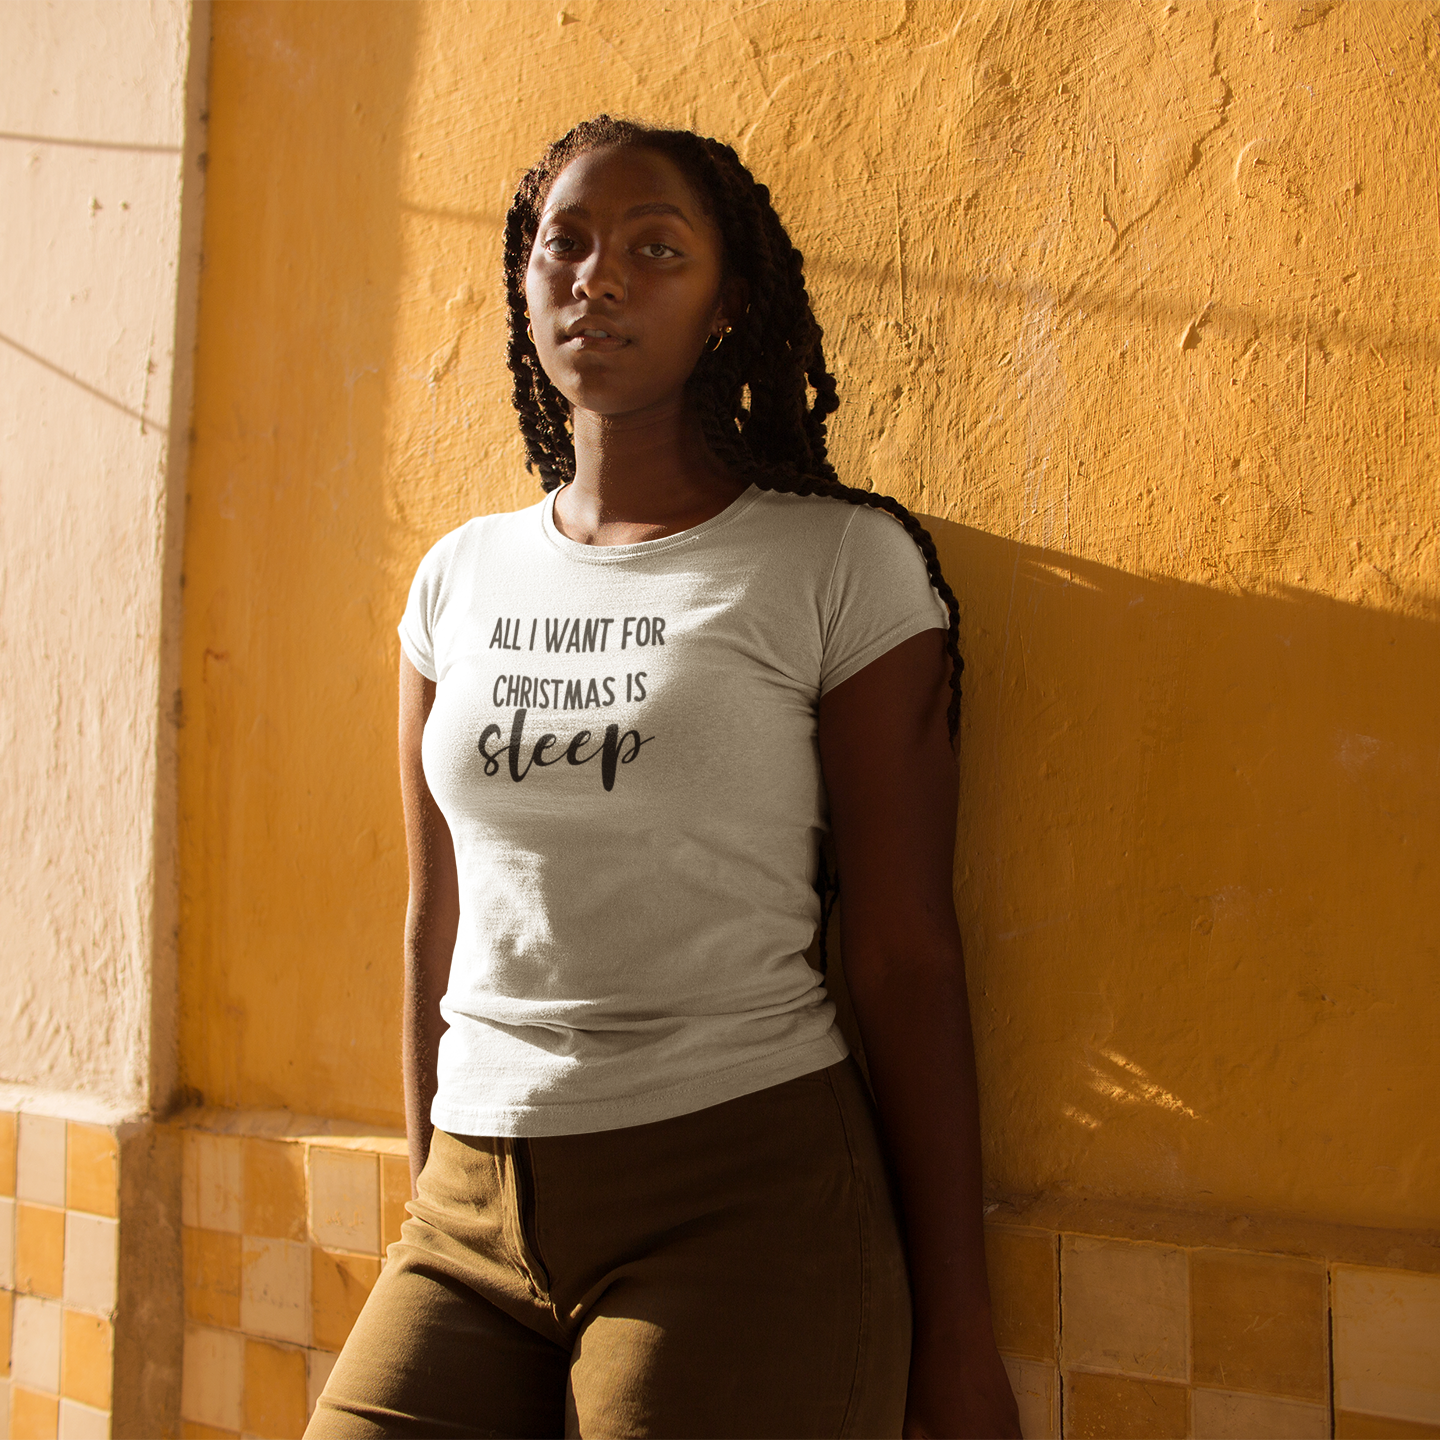 Black woman with braids in front of yellow wall, wearing white shirt with 'All I want for Christmas is sleep' print by KMLeon.